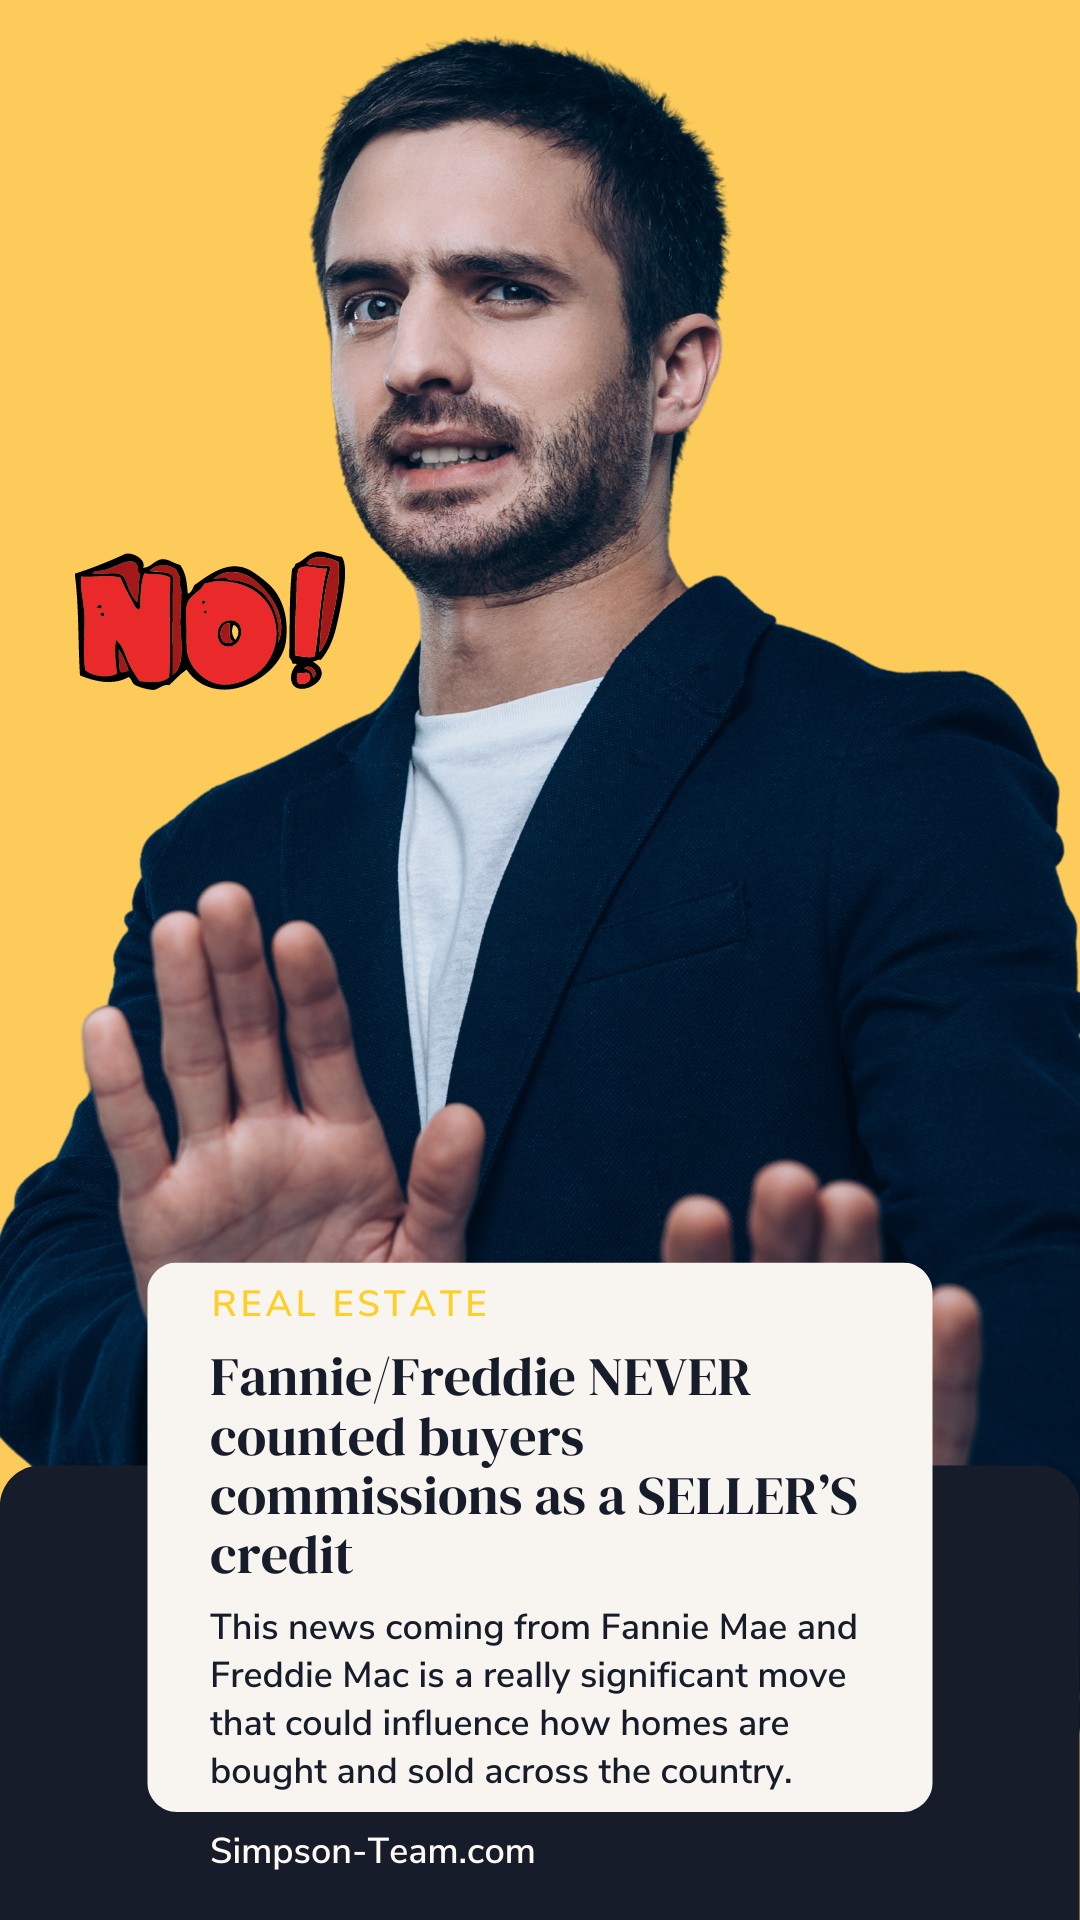 Fannie/Freddie NEVER counted buyer’s commissions as a SELLER’S credit